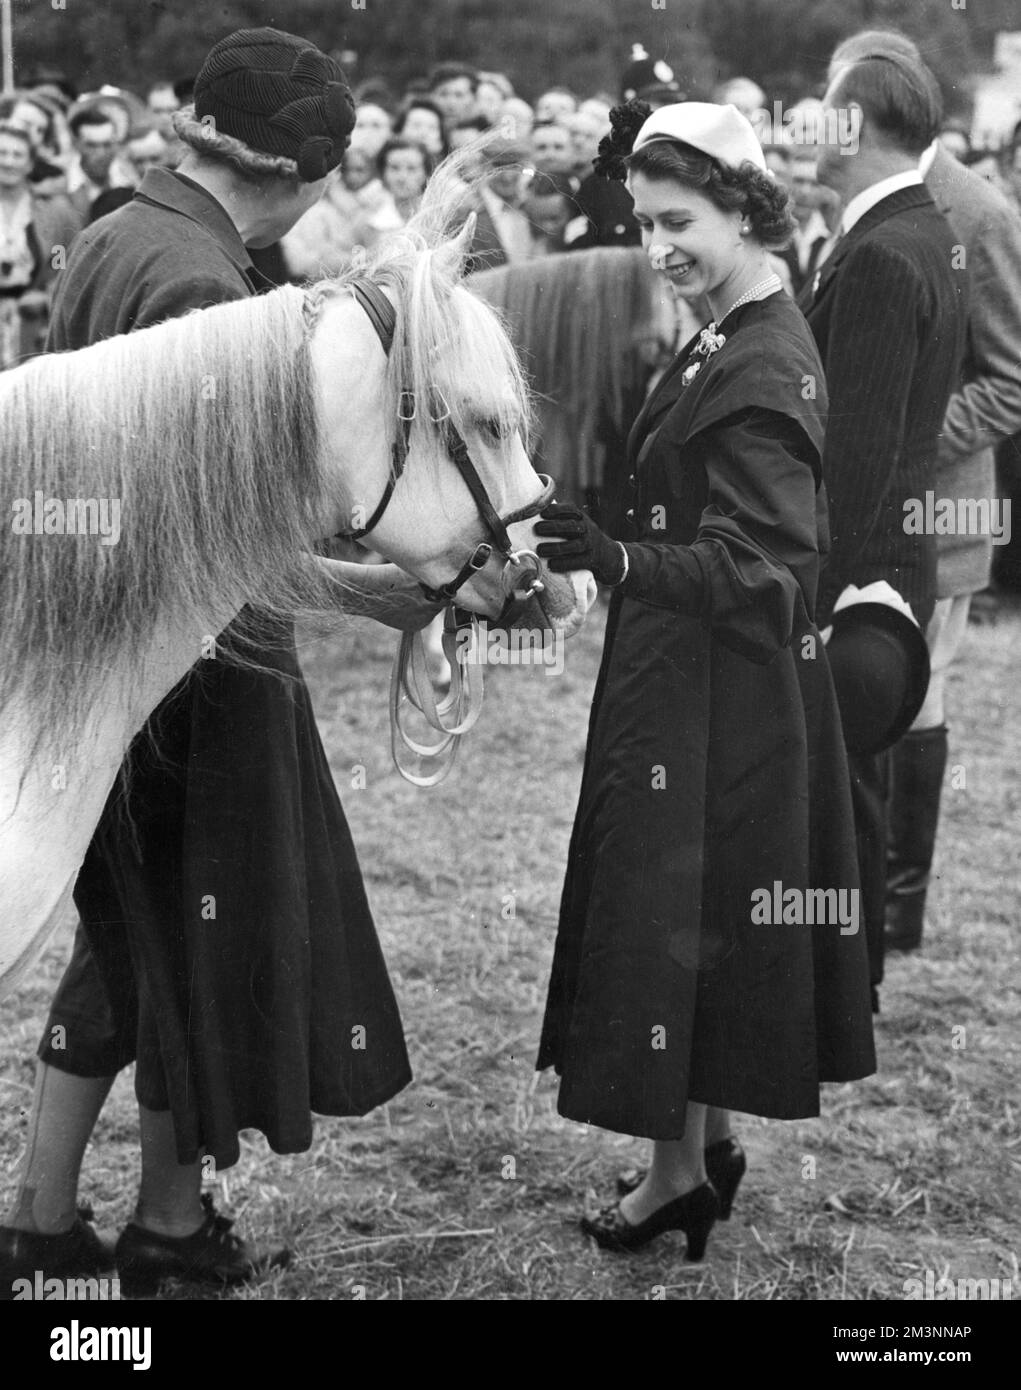 Queen Elizabeth II attending the Royal Agricultural Society show at Newton Abbot in Devon, seen patting one of the winners in the pony class.     Date: 1952 Stock Photo